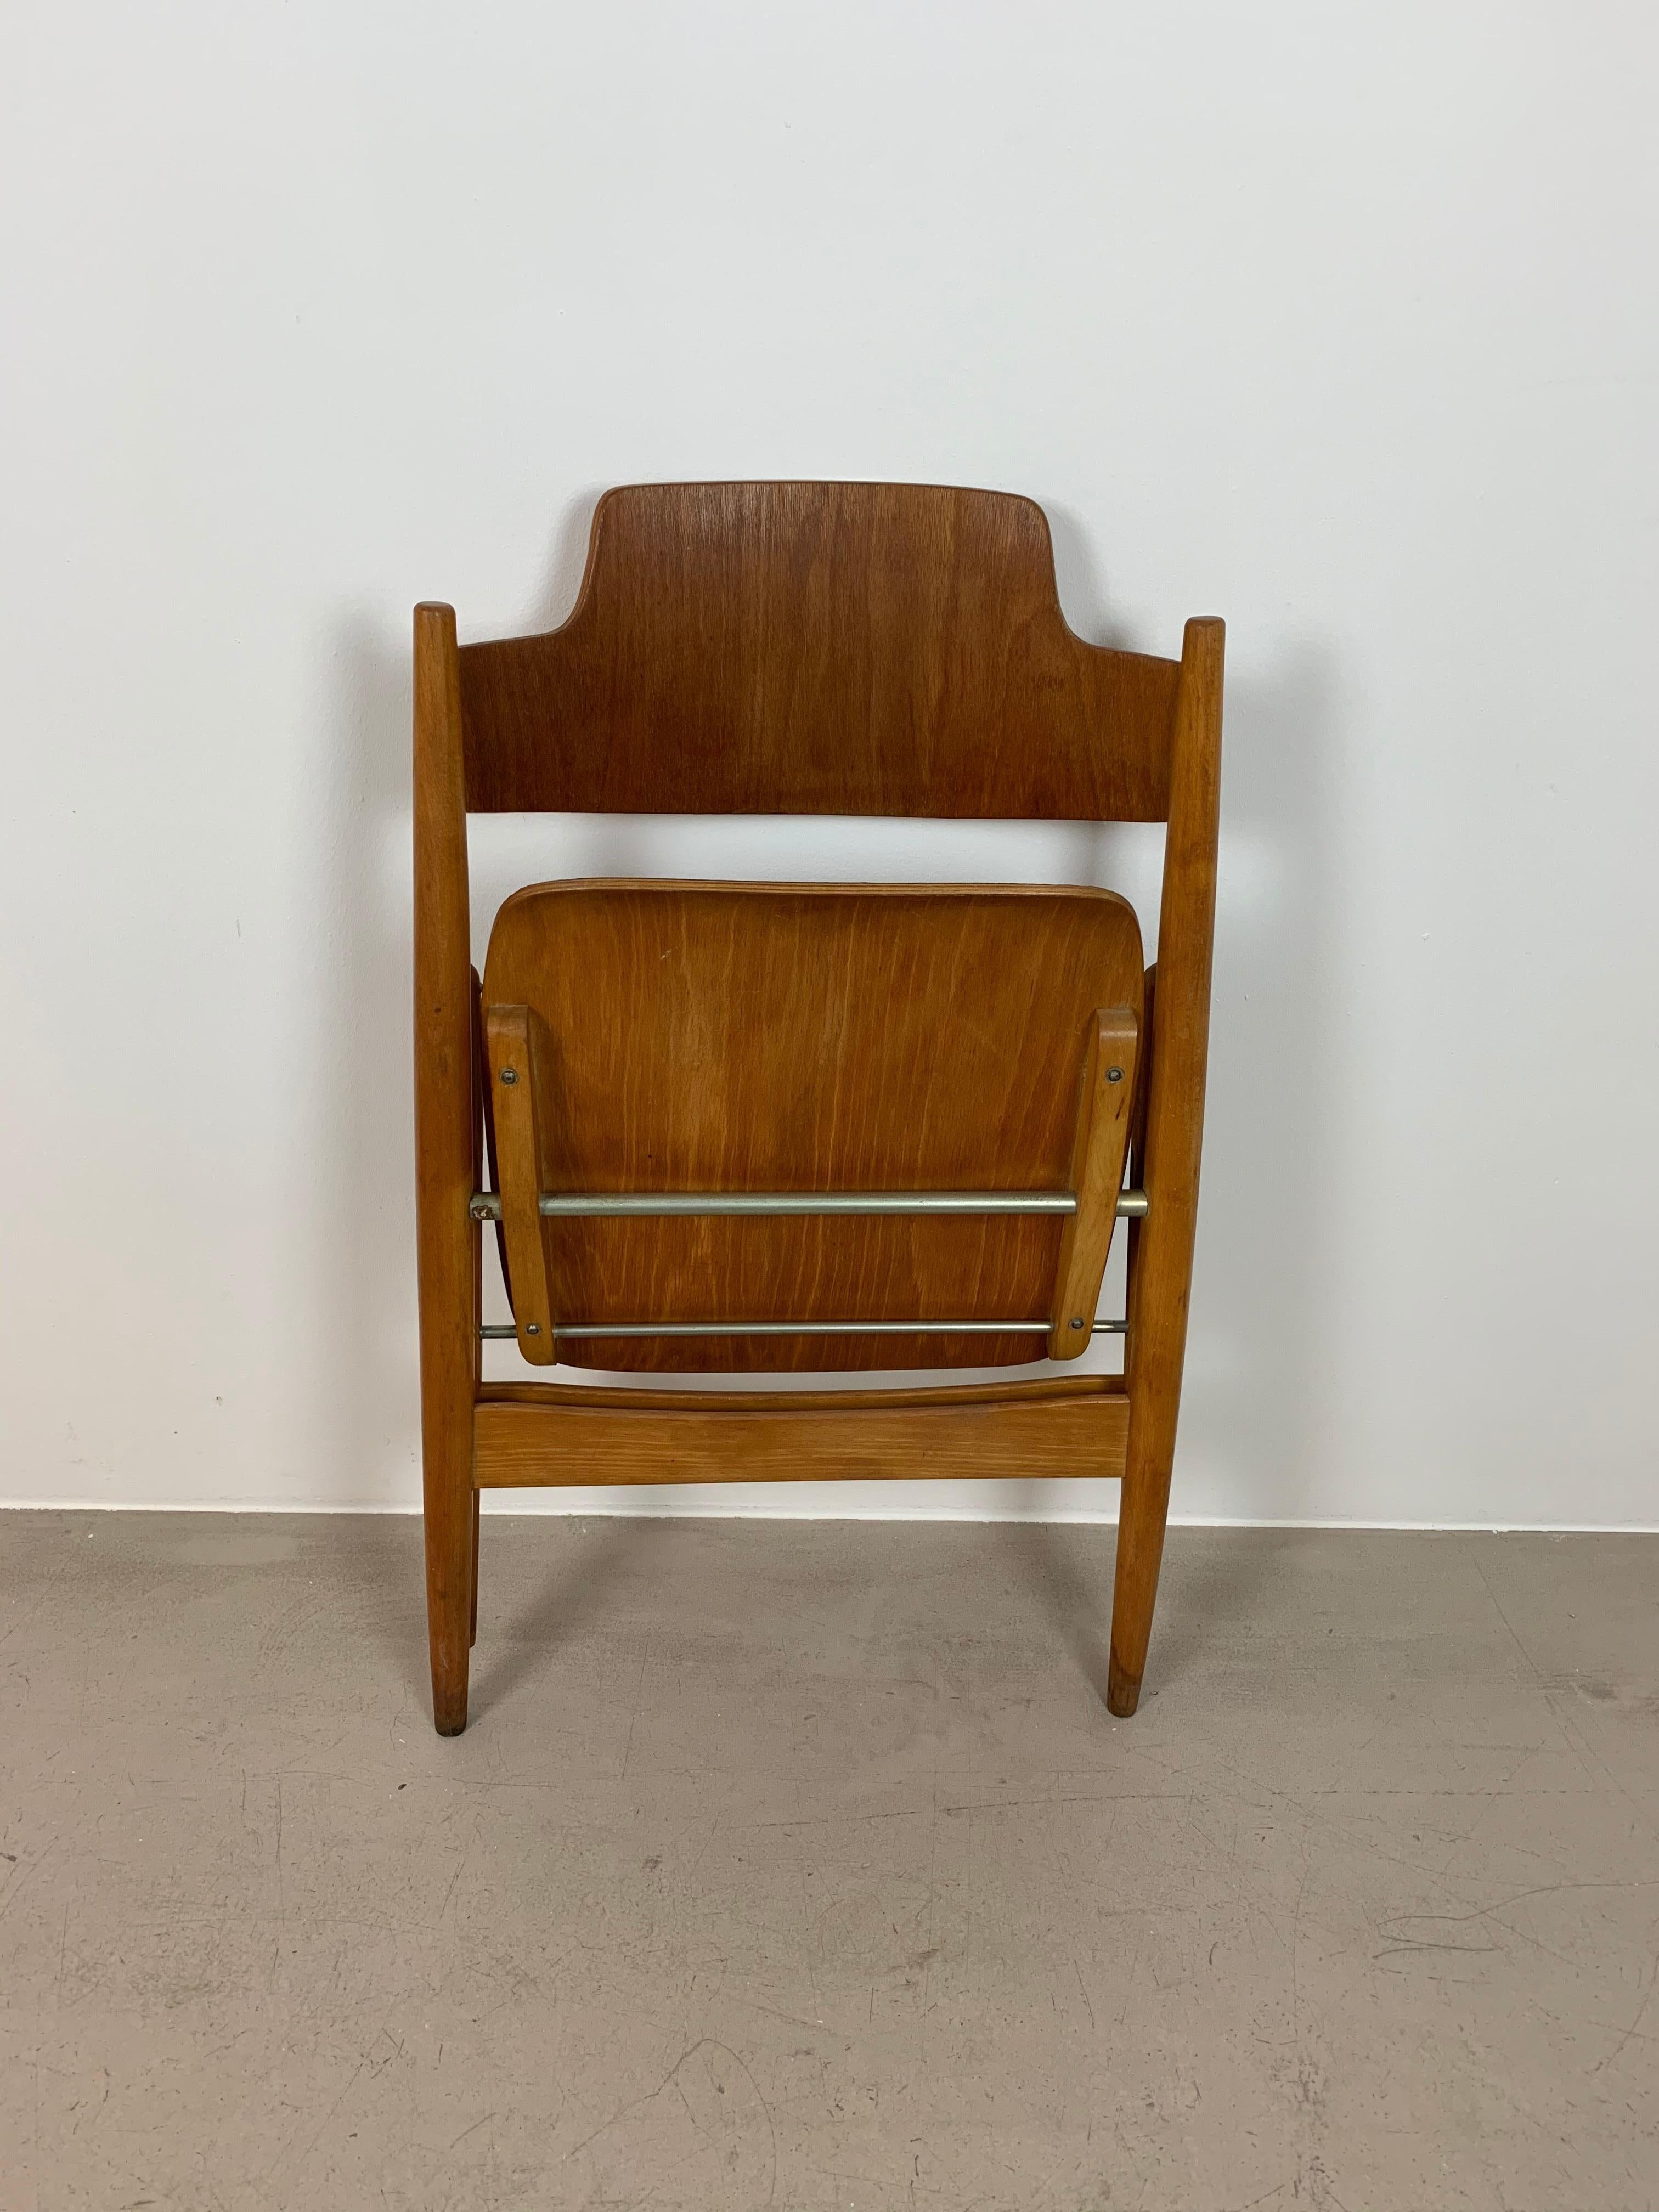 Very nice folding chair model SE18 designed by Egon Eiermann (1950s). The chair is made of beechwood and has a very nice folding mechanism. Because its foldable it can be easily stocked away. The chair has a nice patina from age and usage, normal